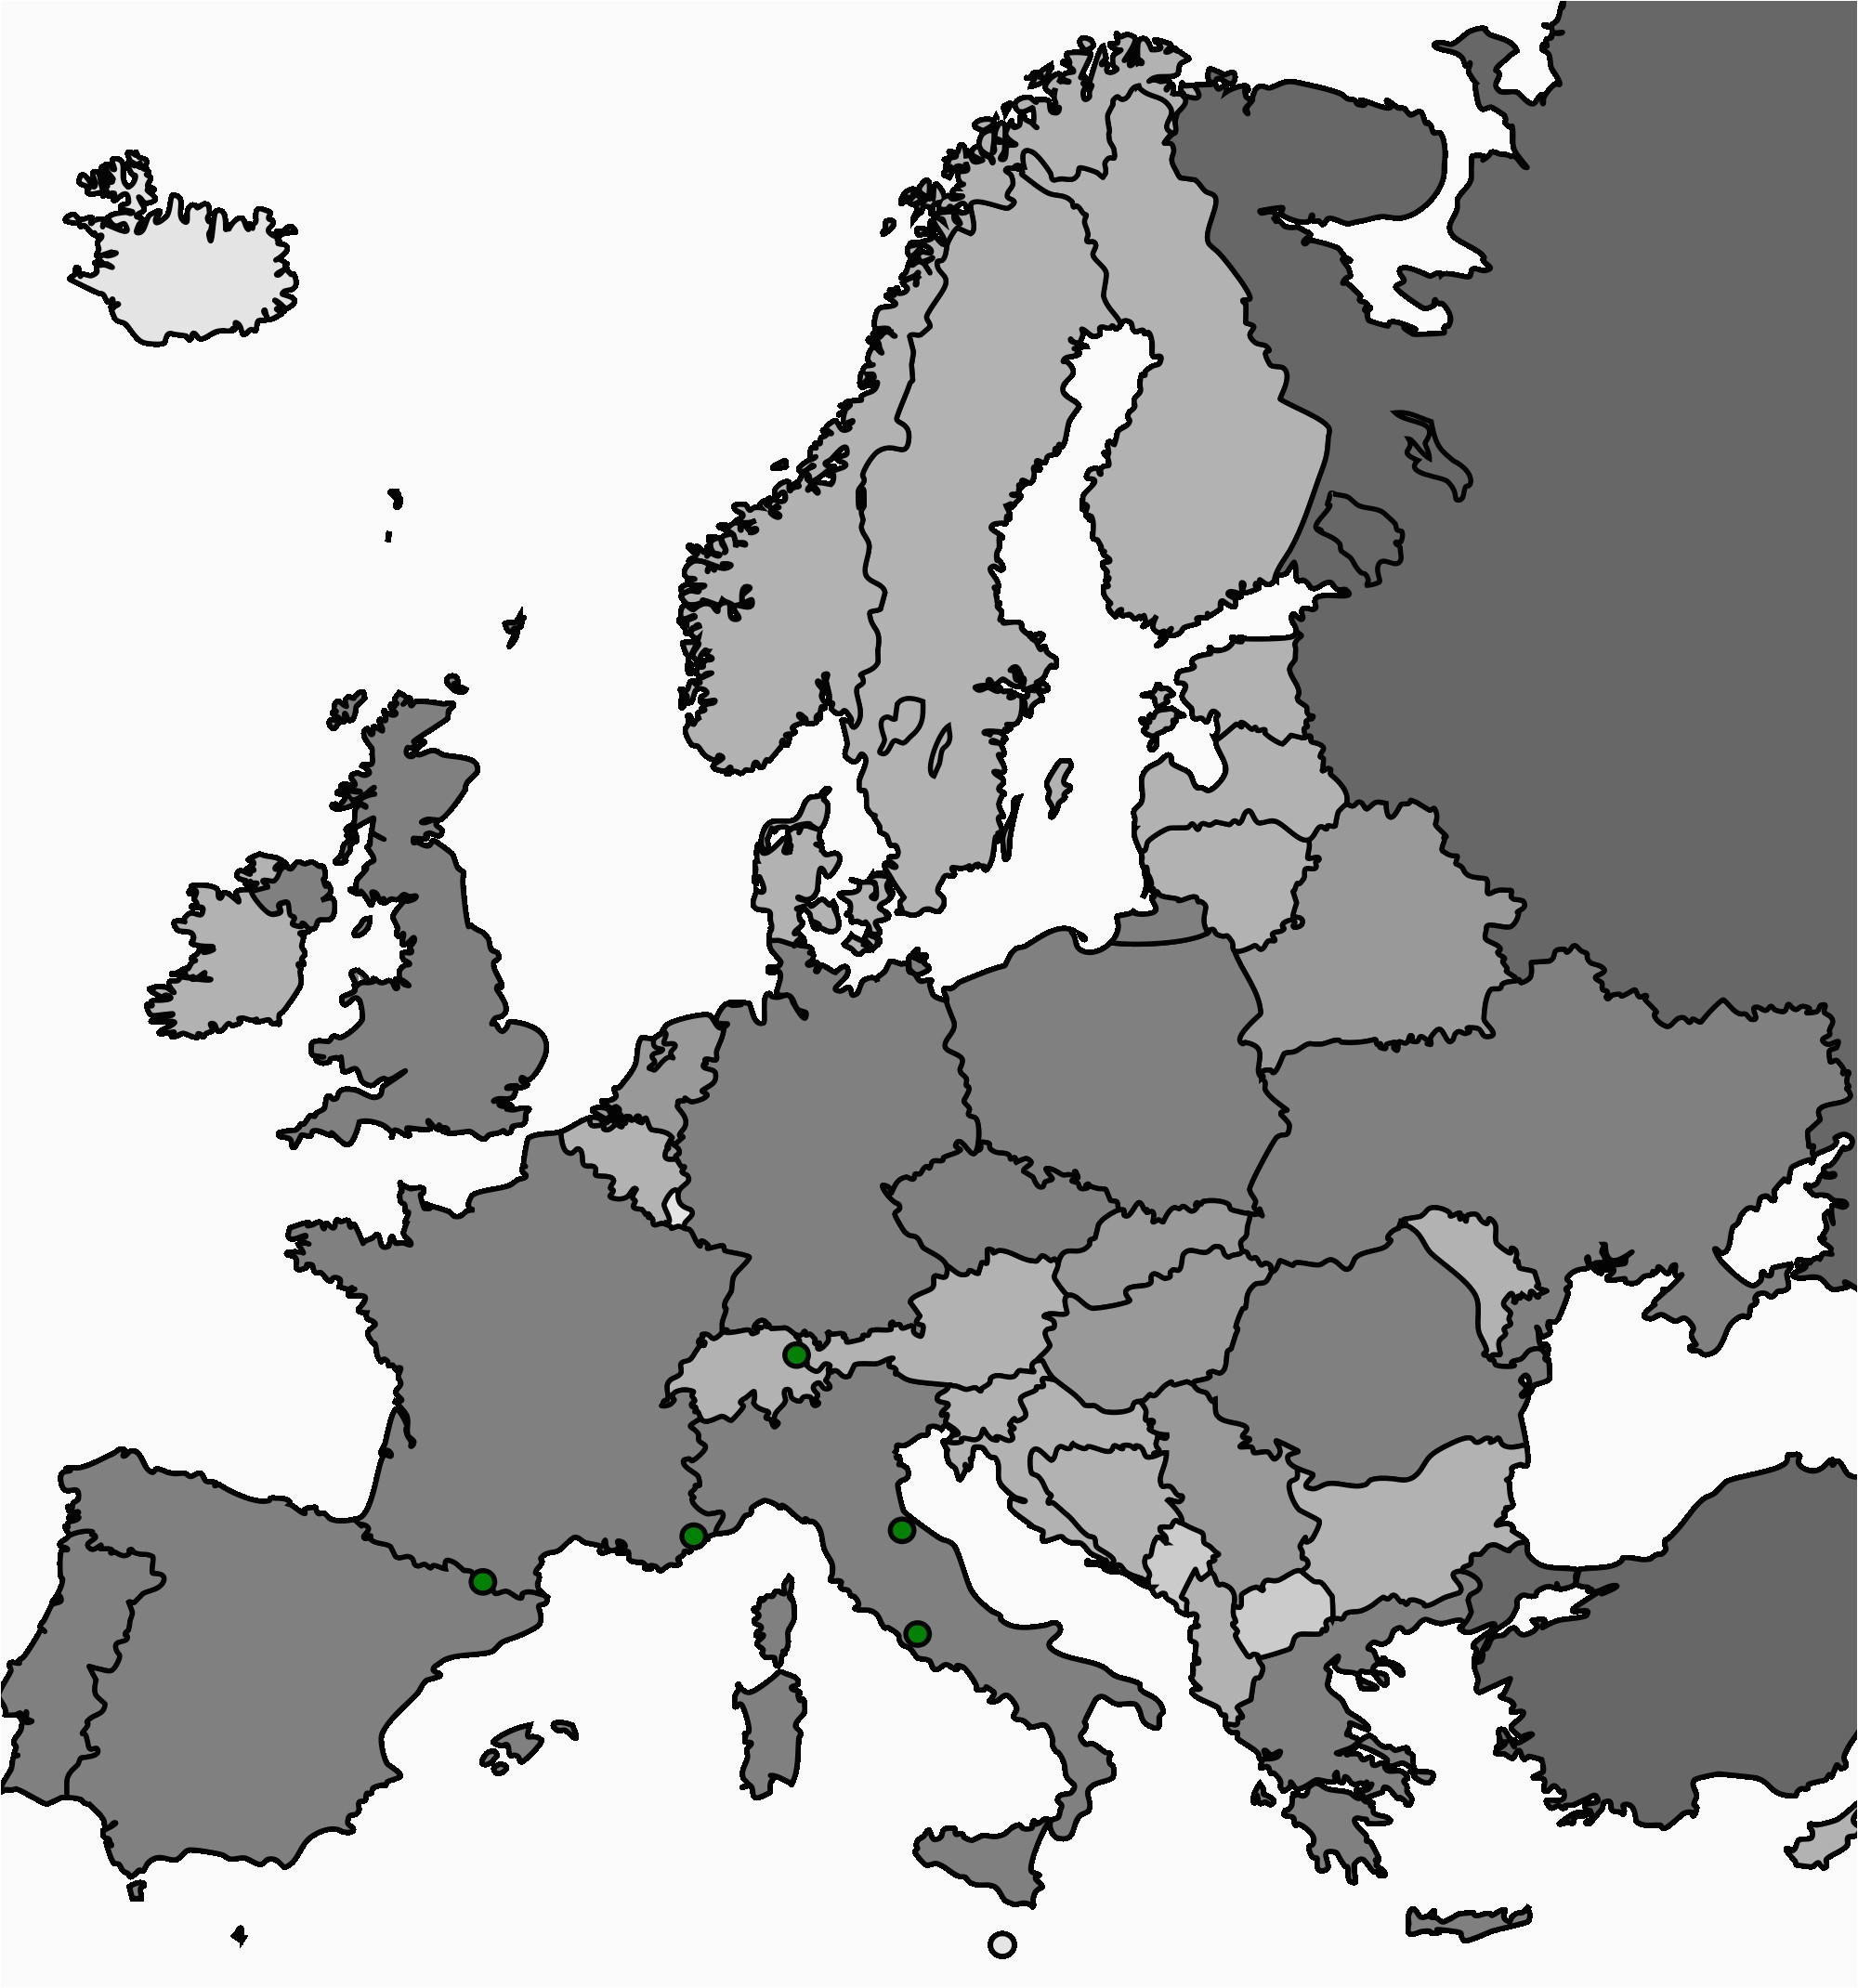 Europe Map No Labels 53 Strict Map Europe No Names Of Europe Map No Labels 